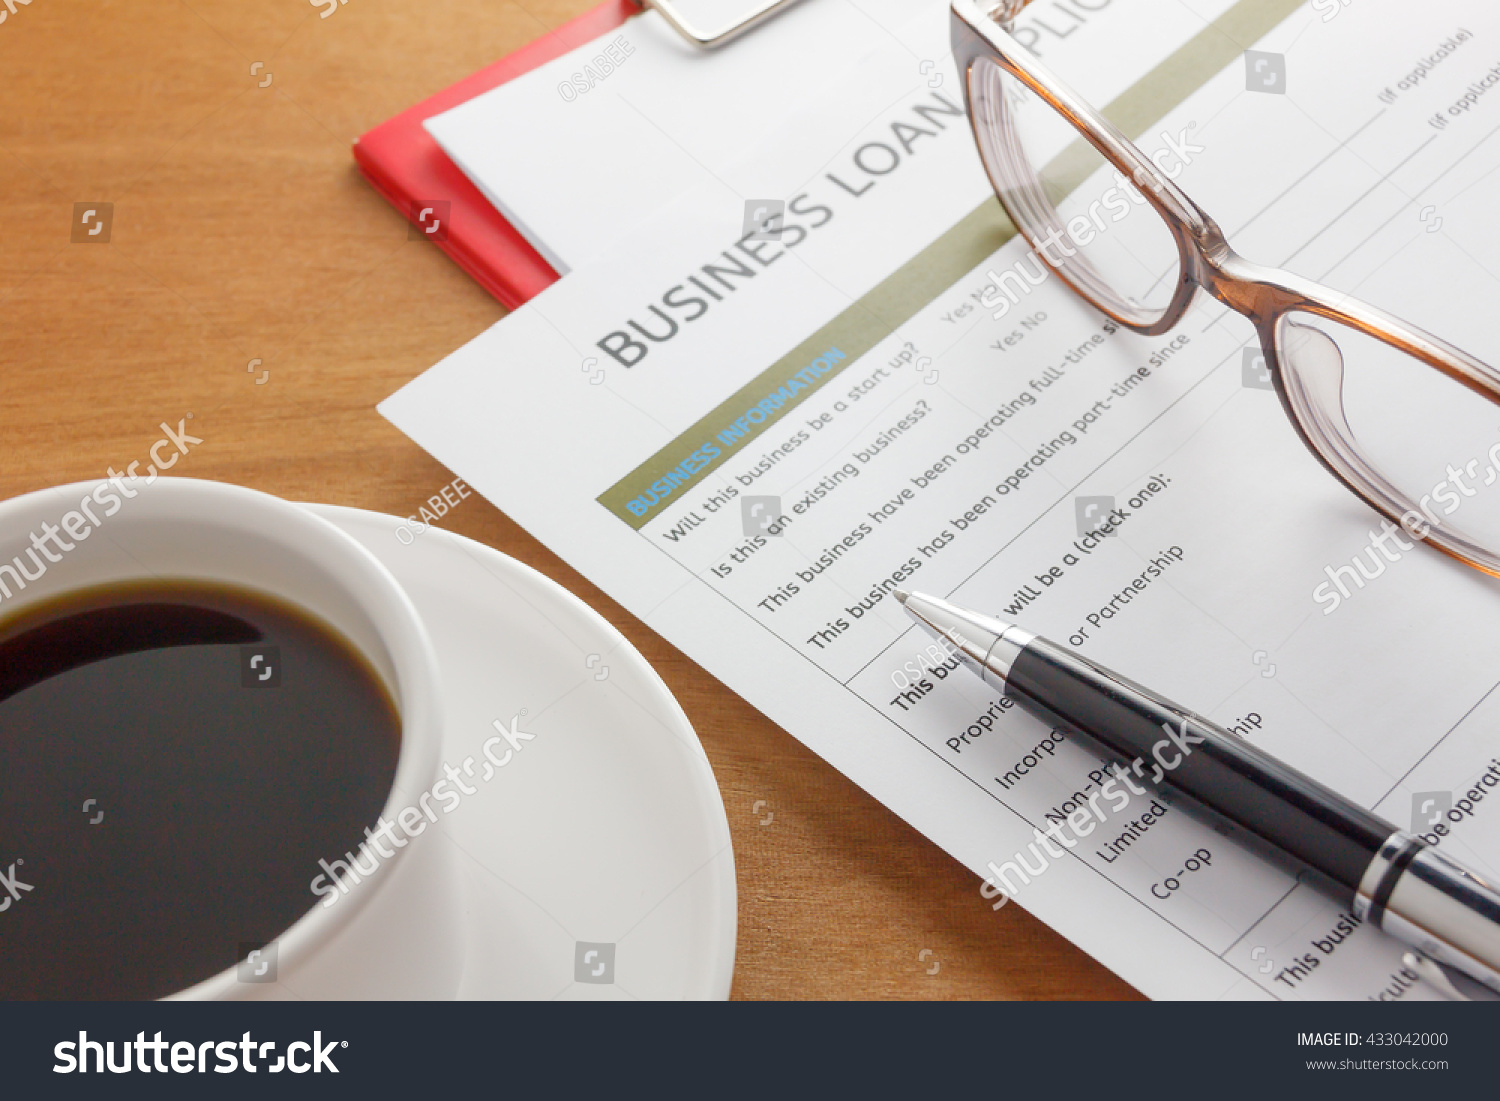 pen,Business loan application form,coffee,glasses,paper clip on wood business background. #433042000